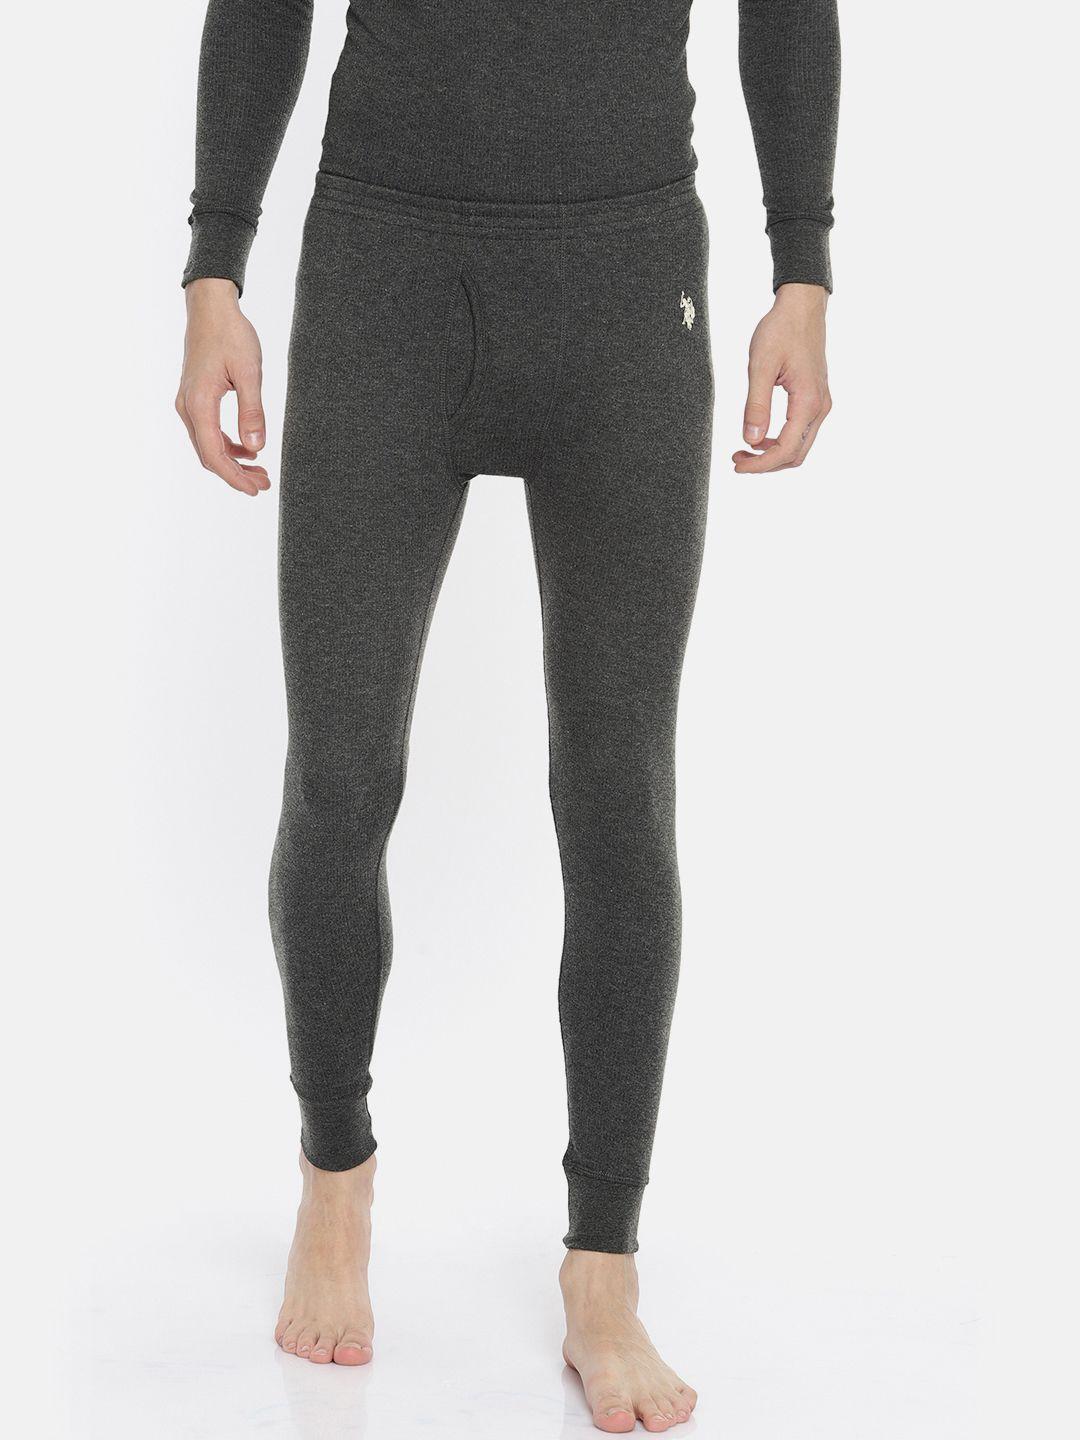 u.s.-polo-assn.-men-charcoal-grey-solid-knitted-thermal-bottoms-i653-031-pl-l